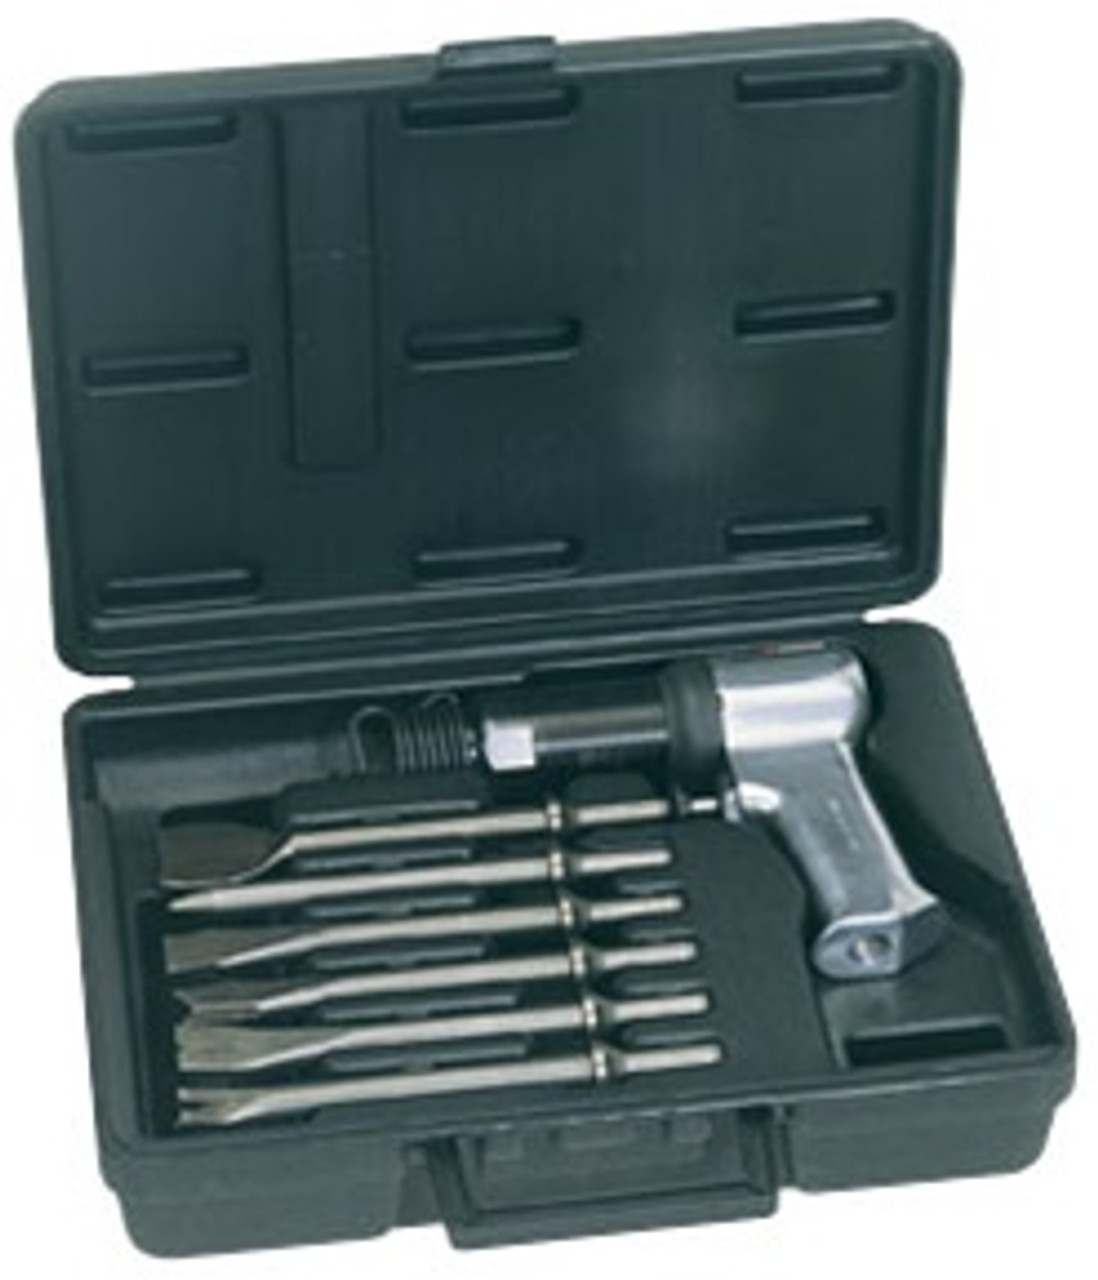 Ingersoll Rand 121-K6 Air Hammer with Chisels